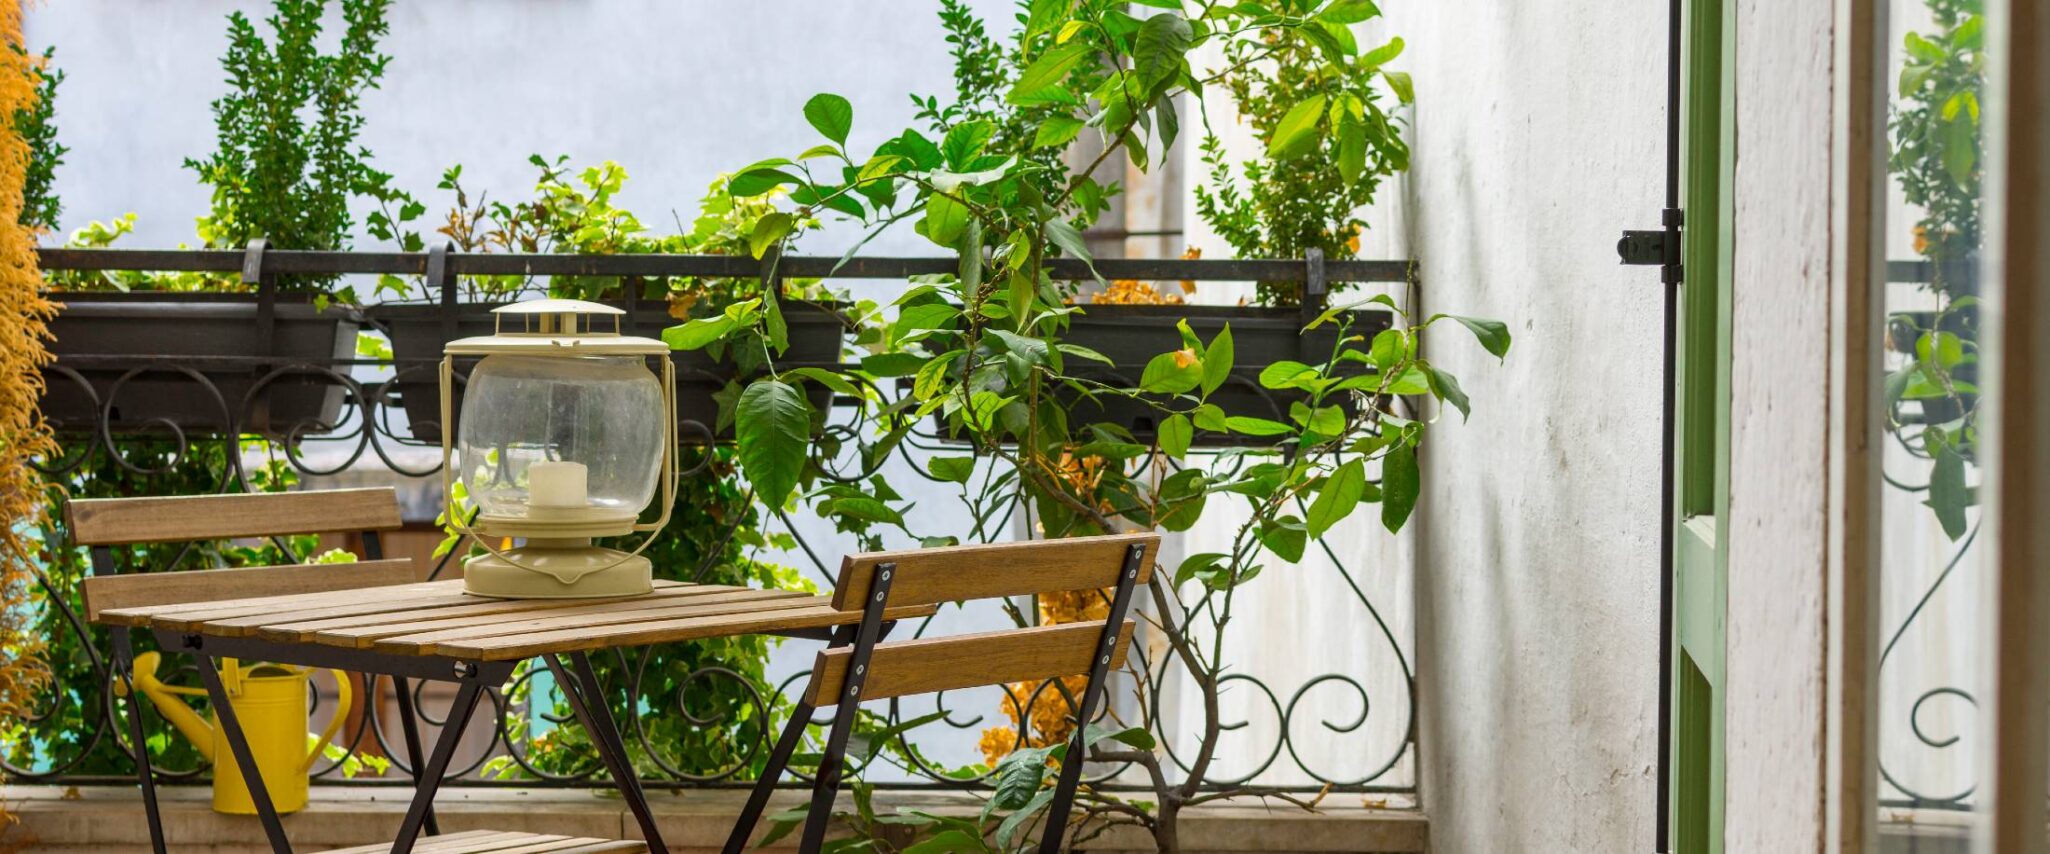 decorated balcony with lots of plants and greenery